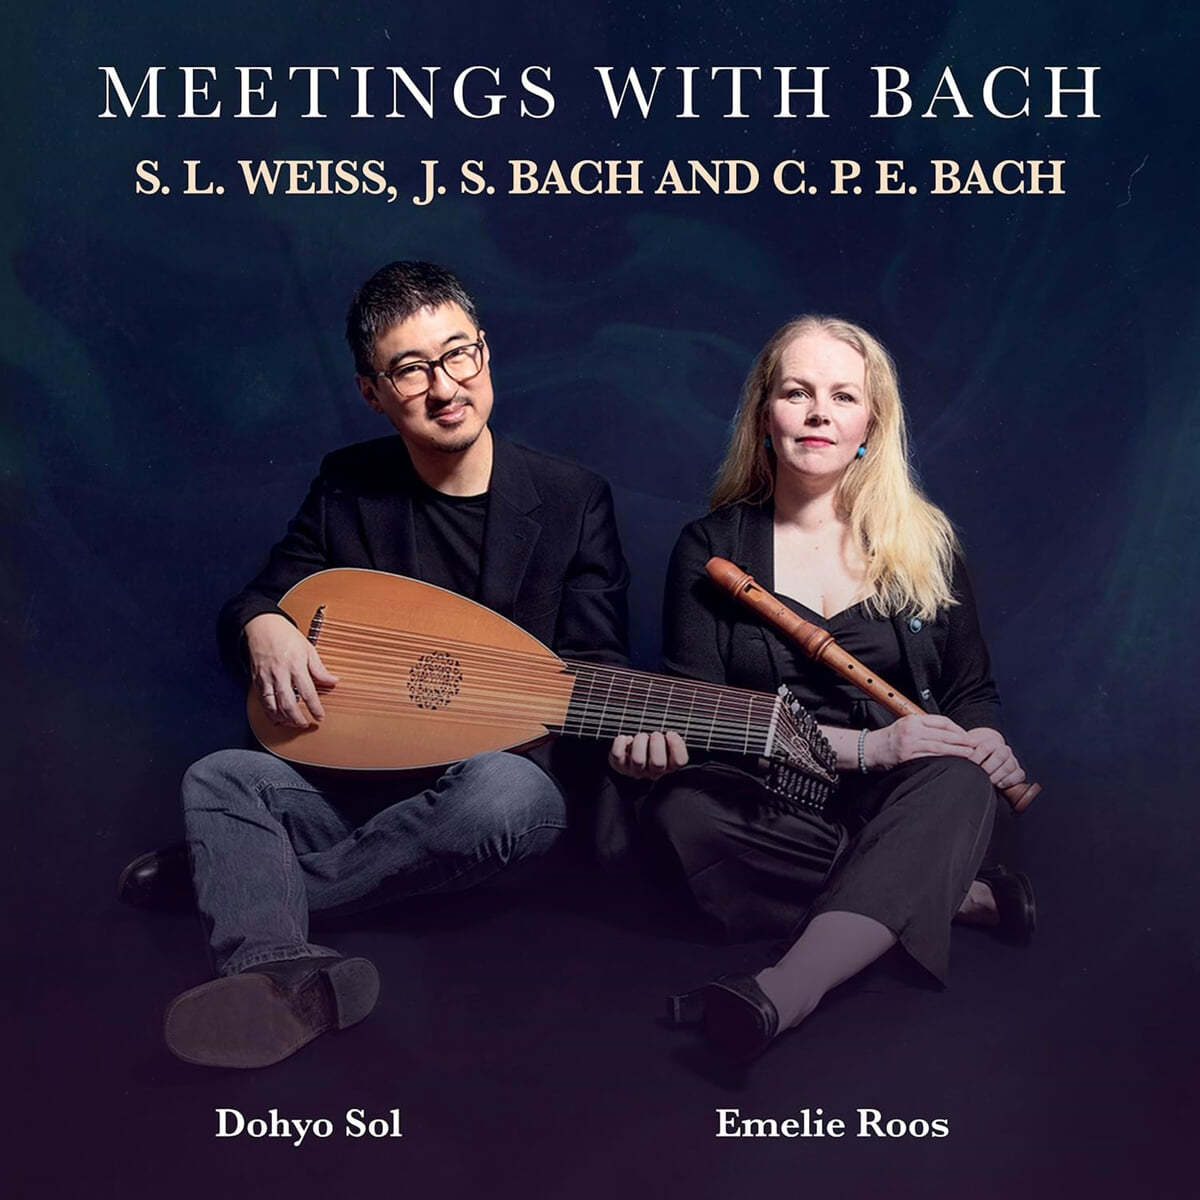 (Meeting with Bach)